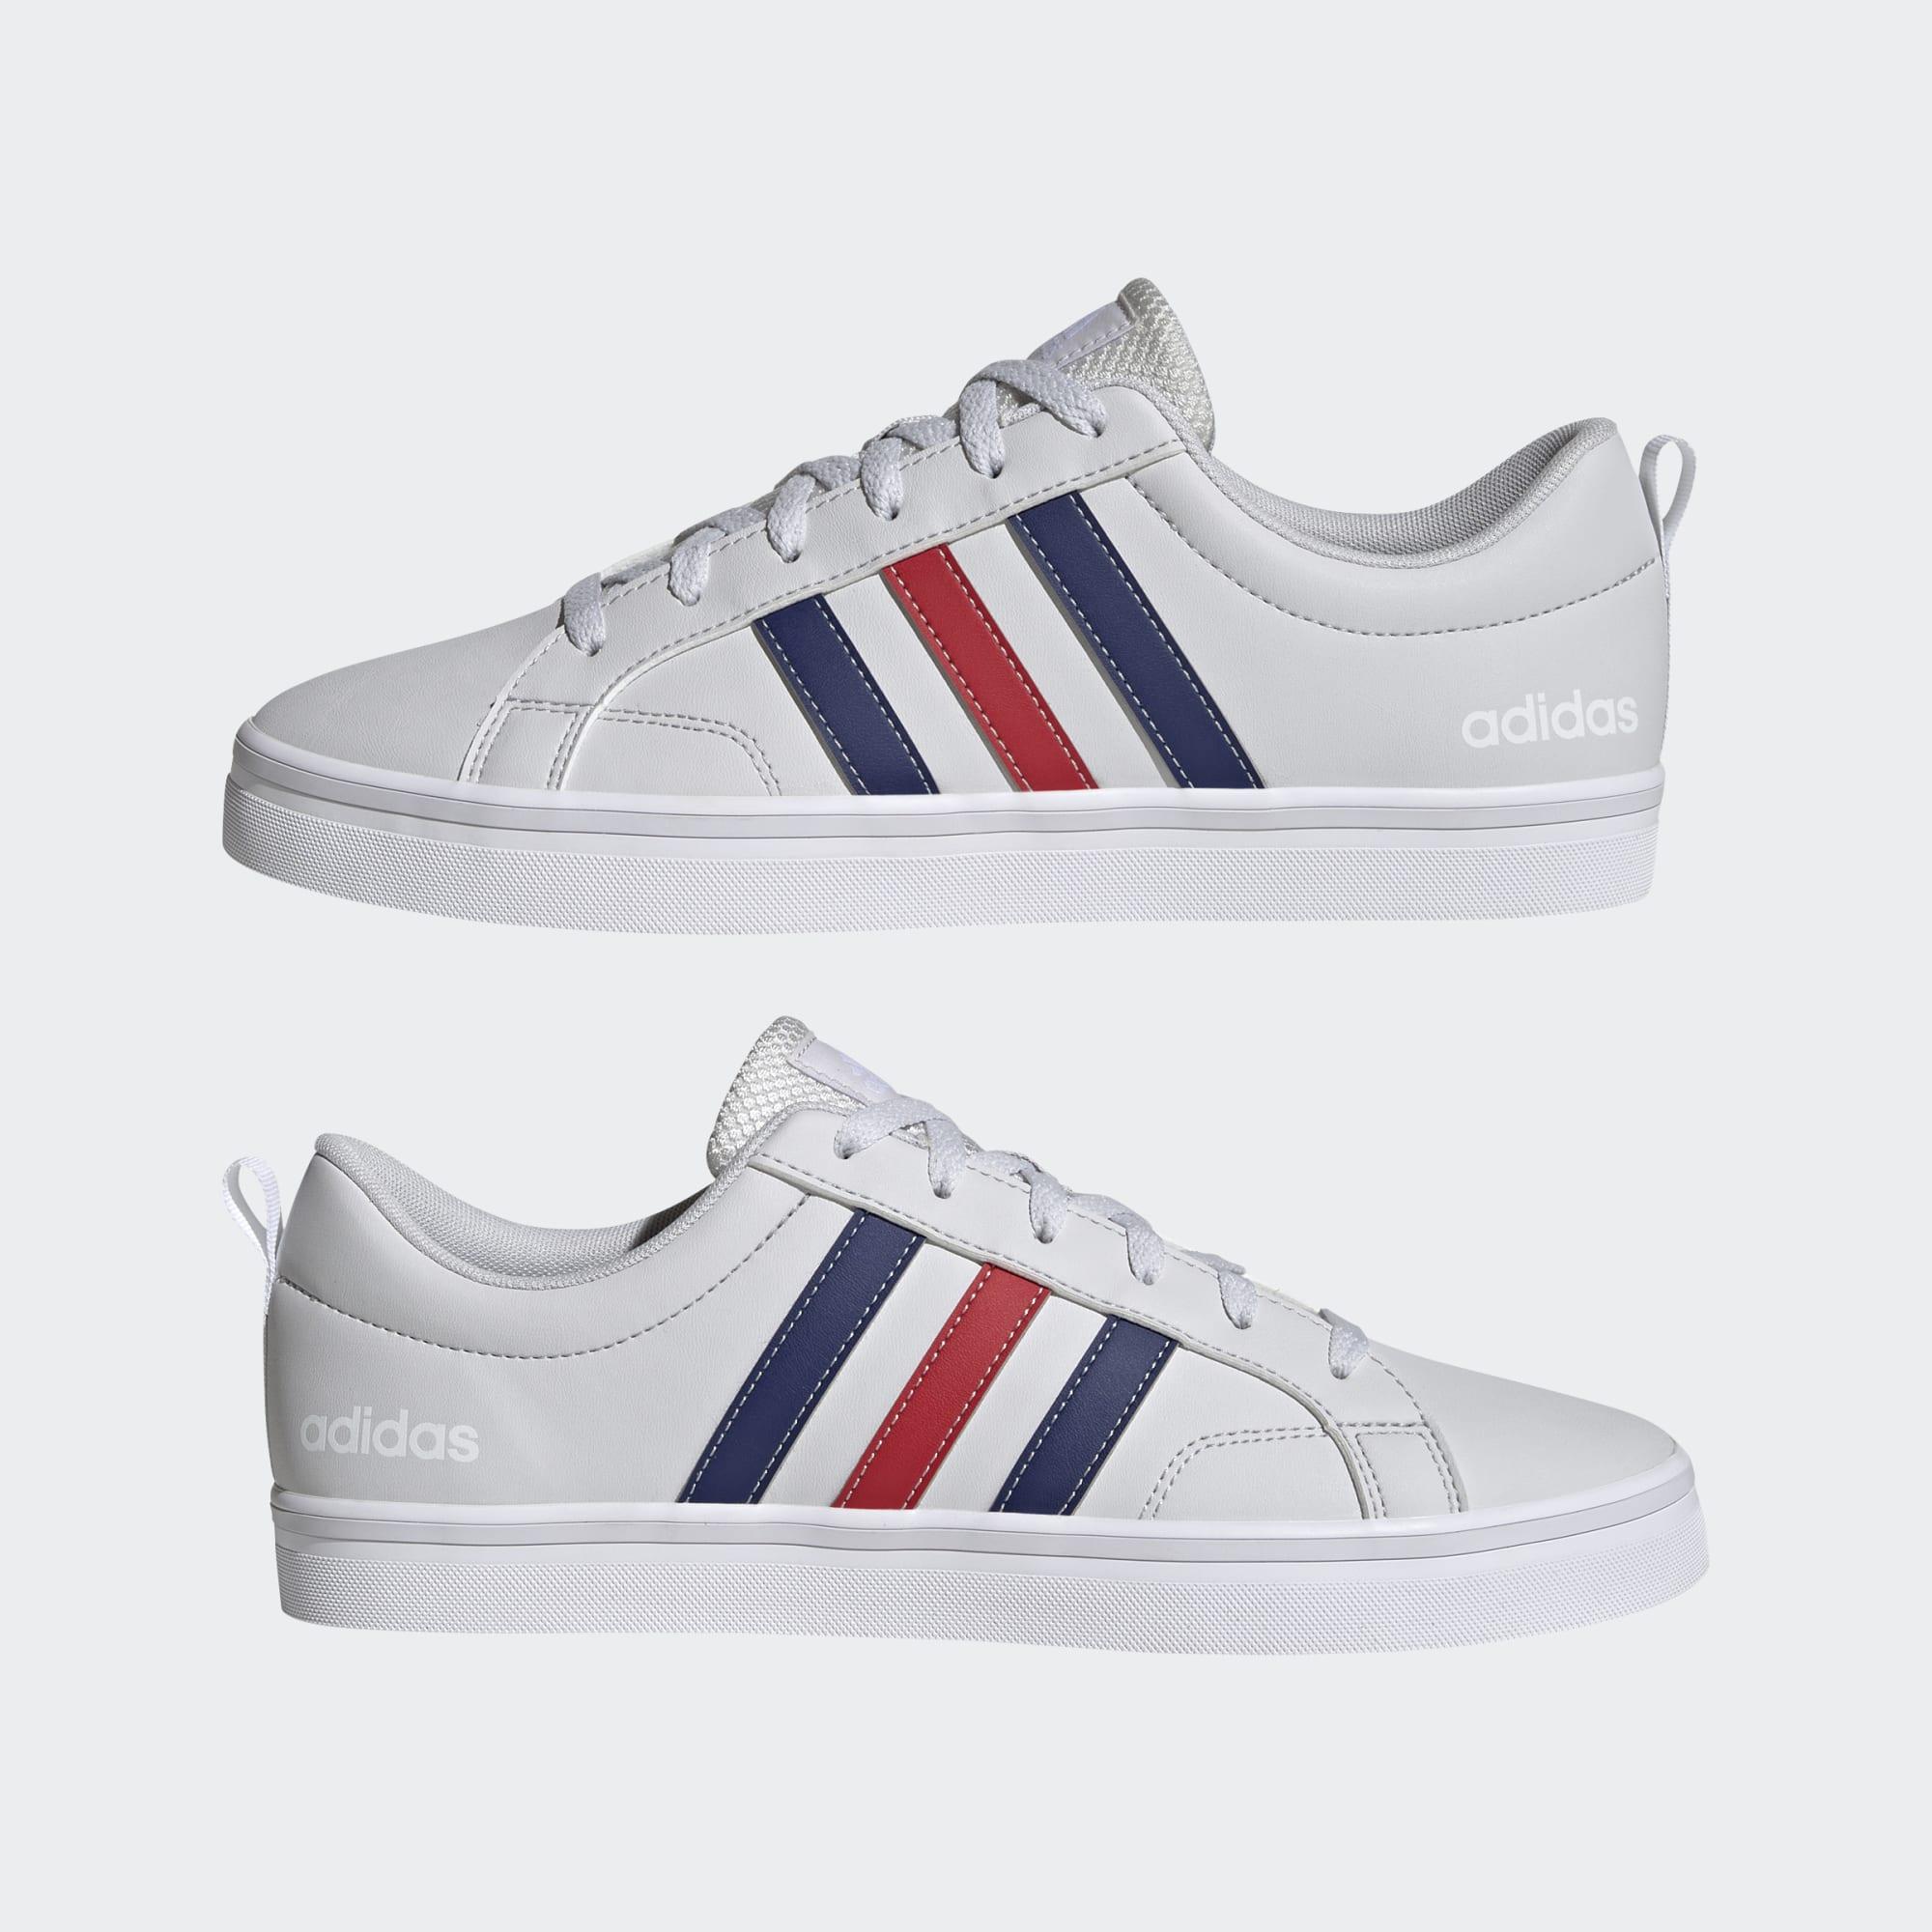 adidas Vs Pace 2.0 3-stripes Branding Synthetic Nubuck Shoes in Grey | Lyst  UK